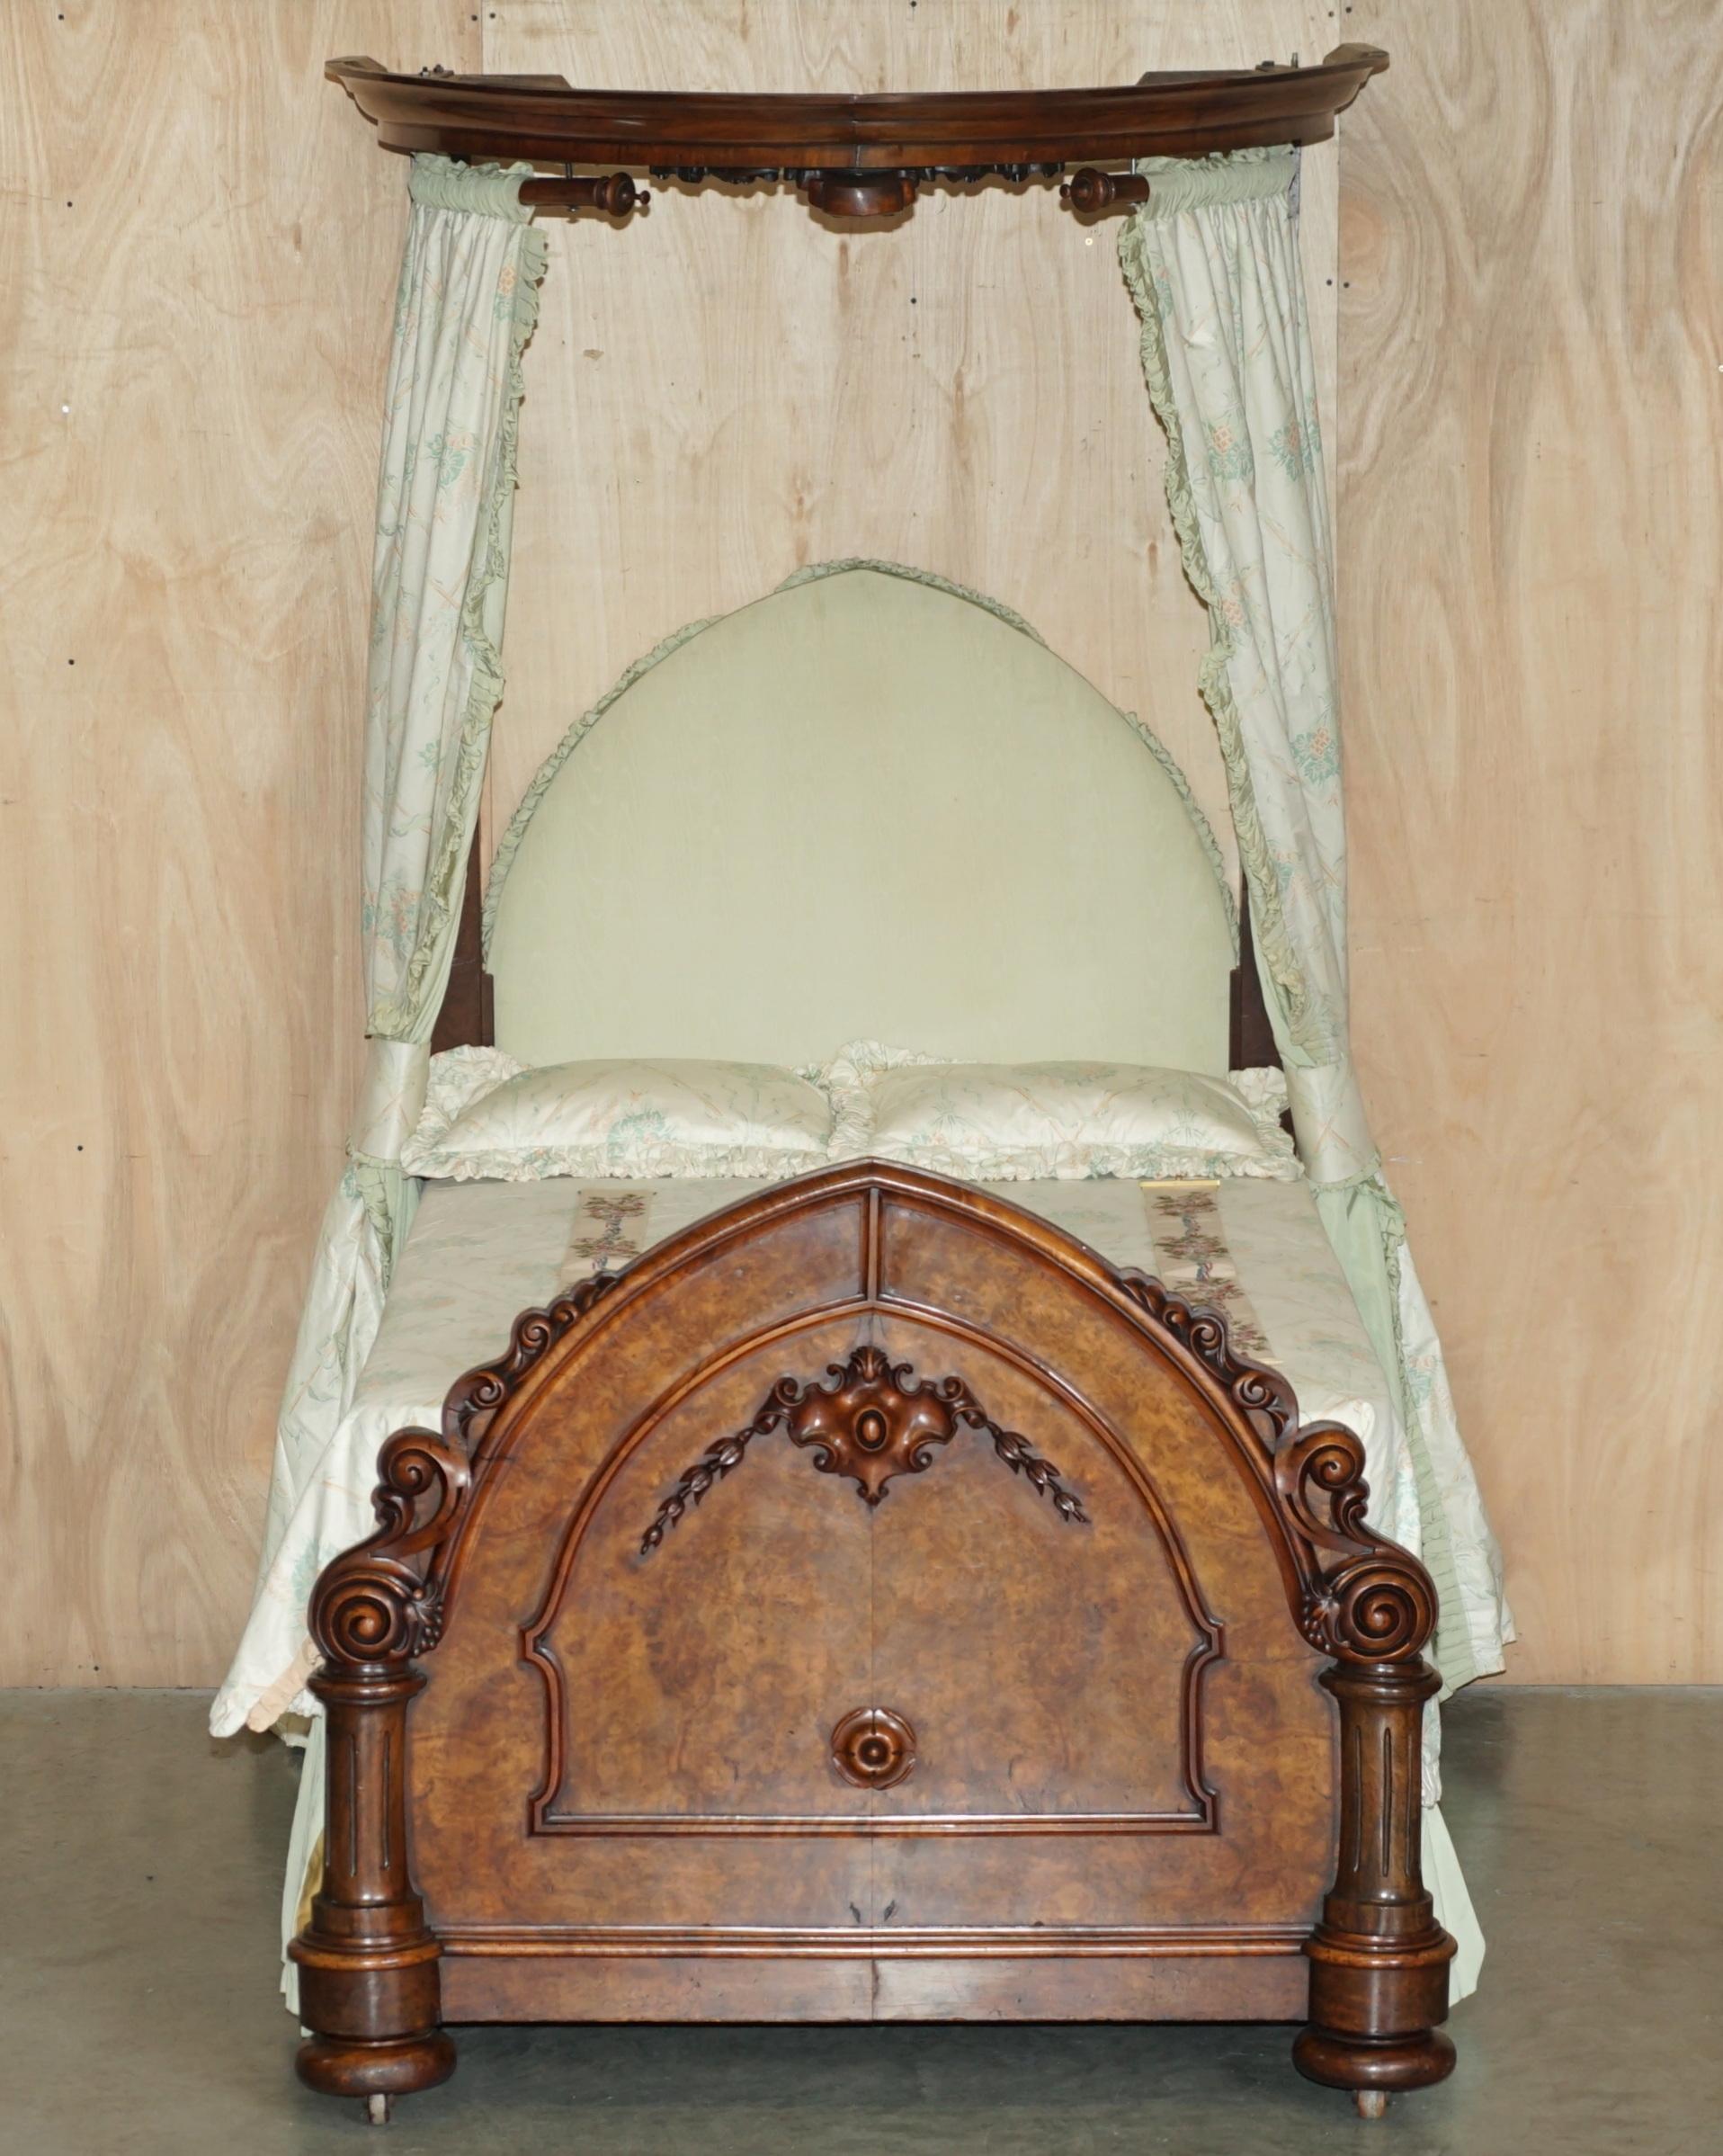 We are delighted to offer for sale this lovely handmade in England Burr Walnut ornately carved Half Tester Canopy bed

A very good looking, extremely comfortable and well-made bed, this is pretty much as ornate and decorative as you will see